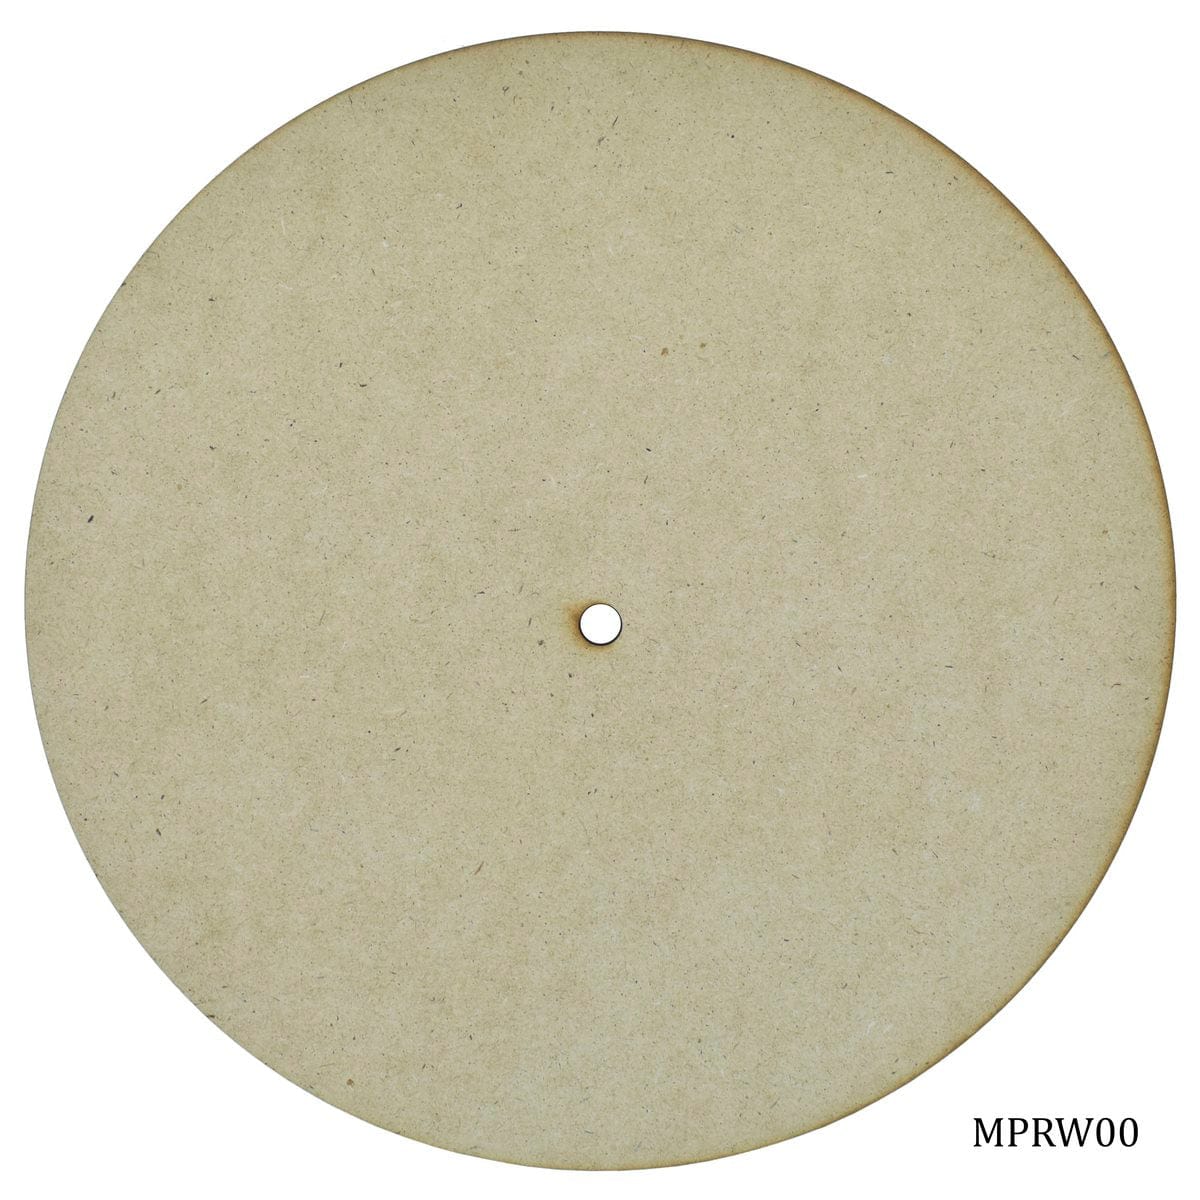 jags-mumbai MDF MDF Plate Round with hole 10 Inch 4mm MPRW00